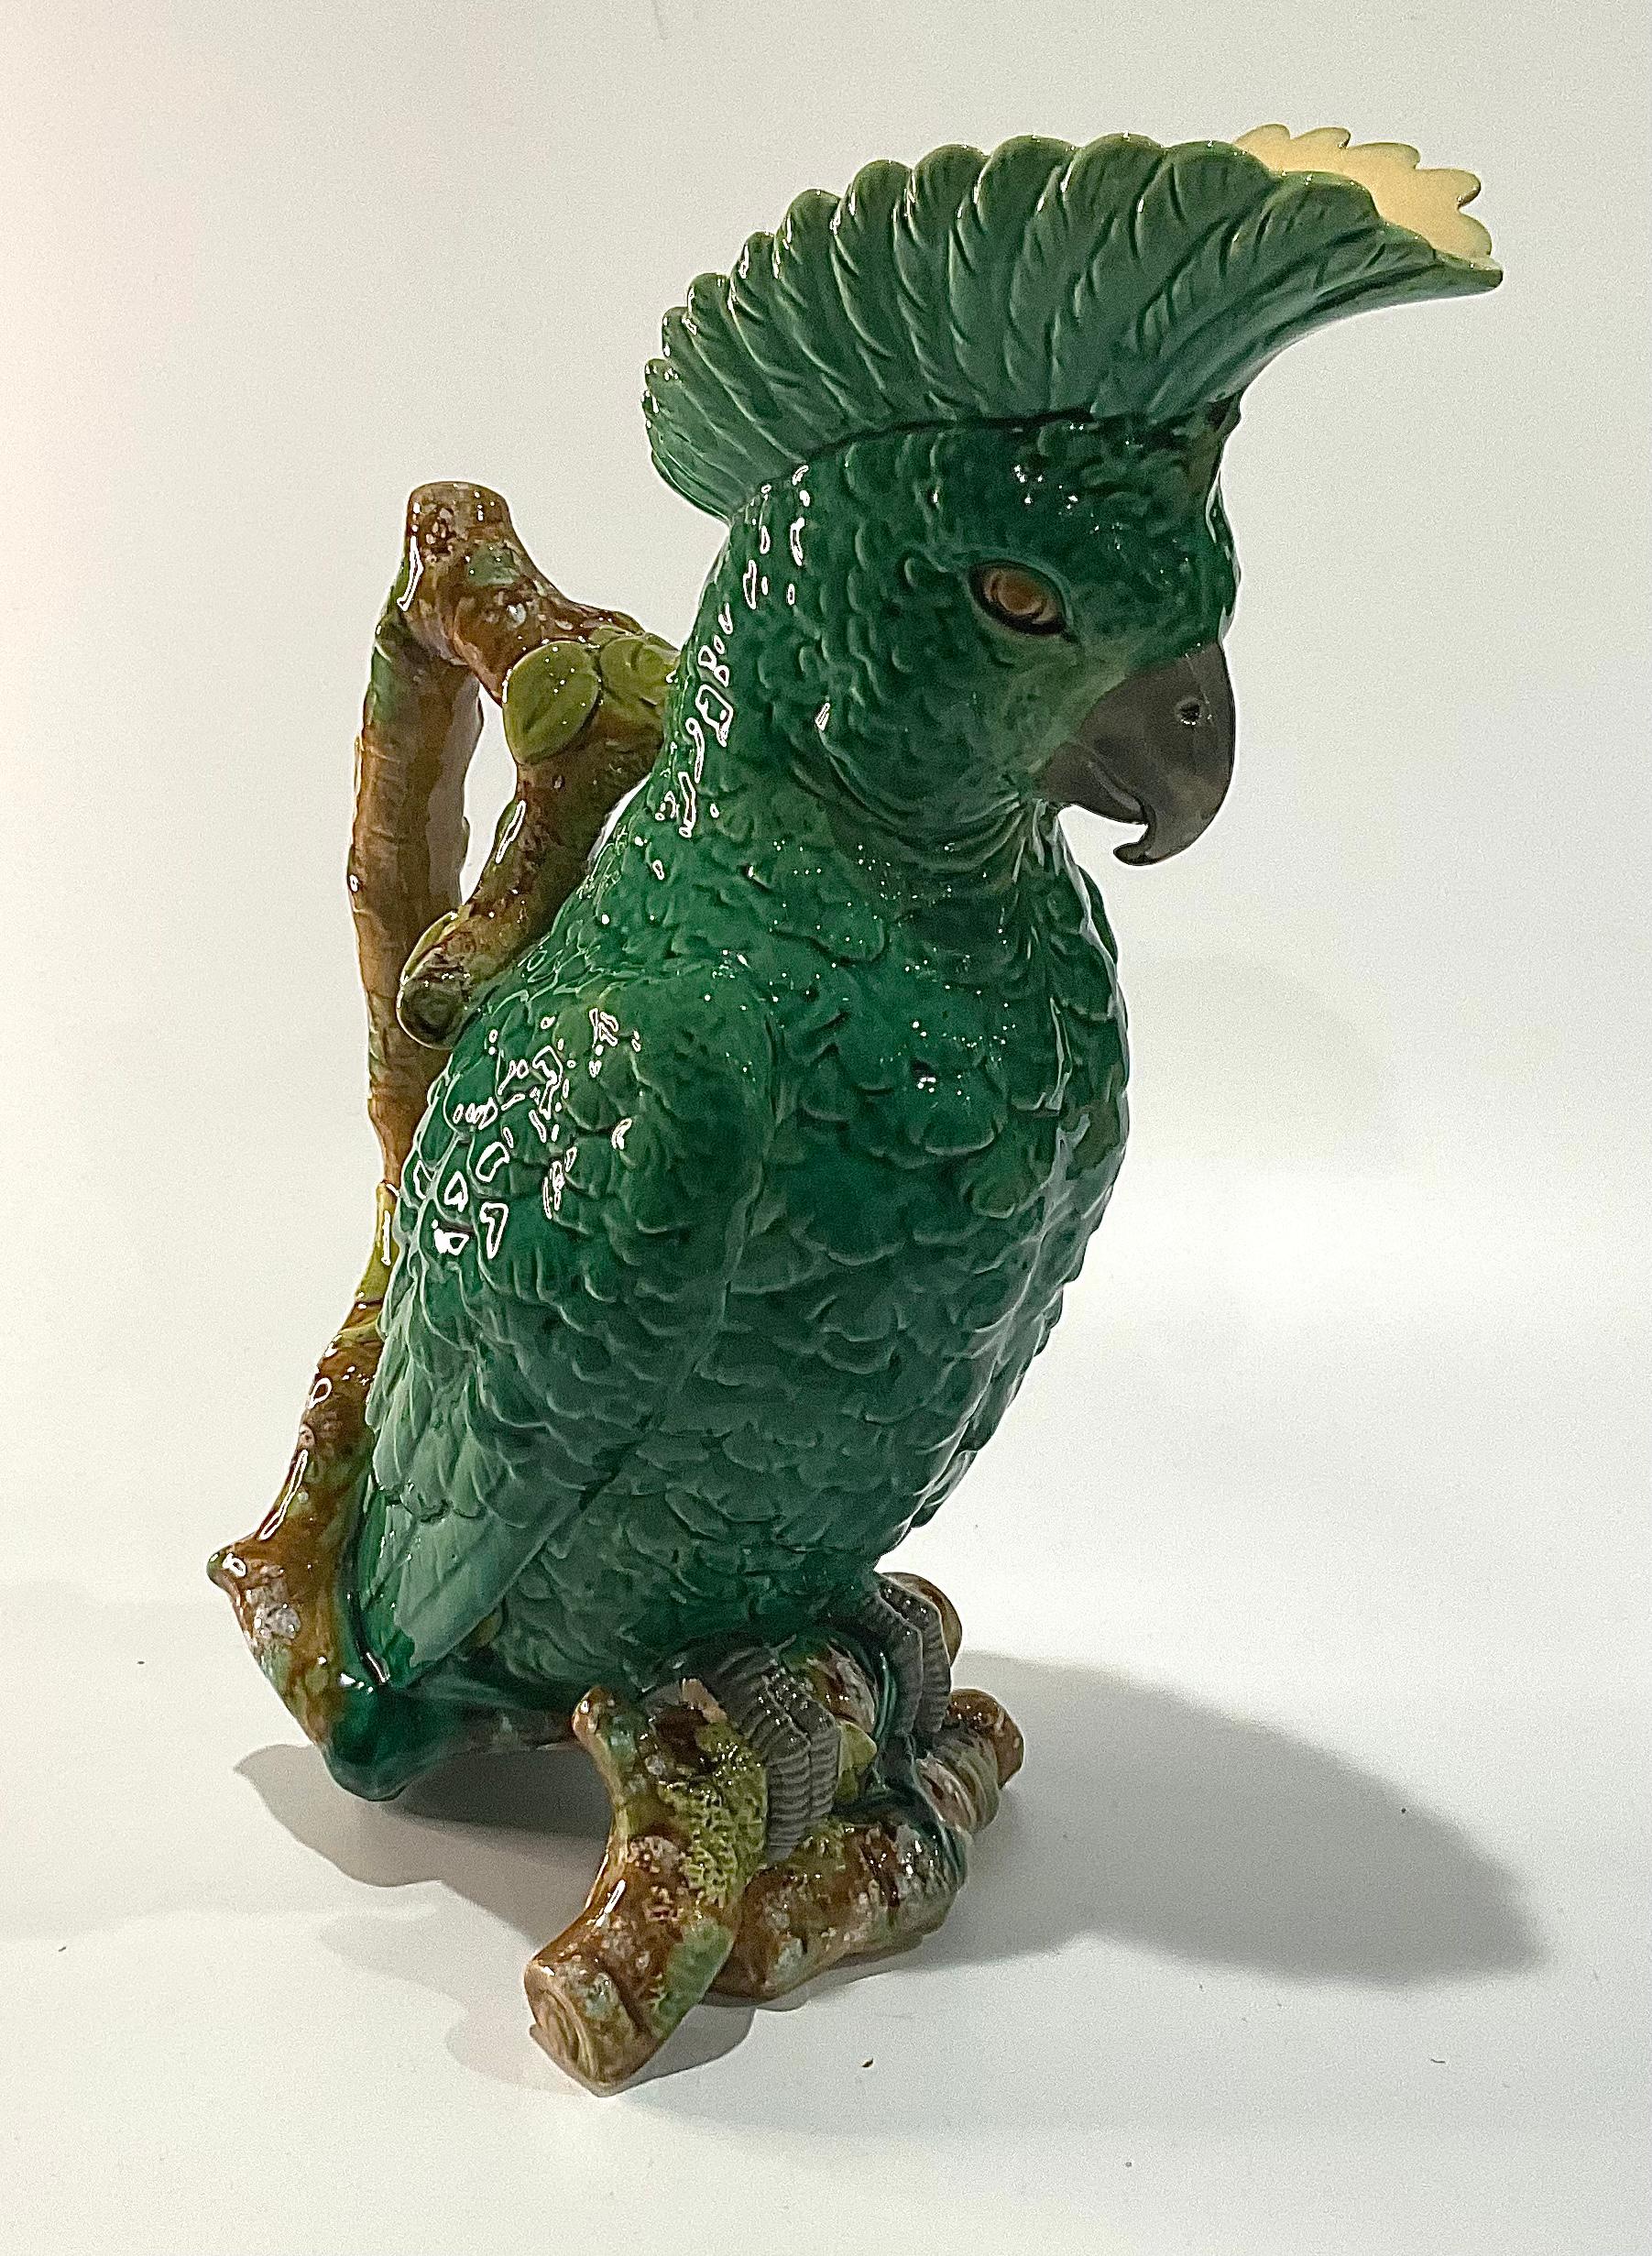 Amazing Cockatoo pitcher or jug in green by William Brownfield for Brownfield and Sons. 

William Brownfield entered the pottery trade in 1837 when he partnered with Noah Robinson and and John Wood to take over the Cobridge Pottery. In 1841 The